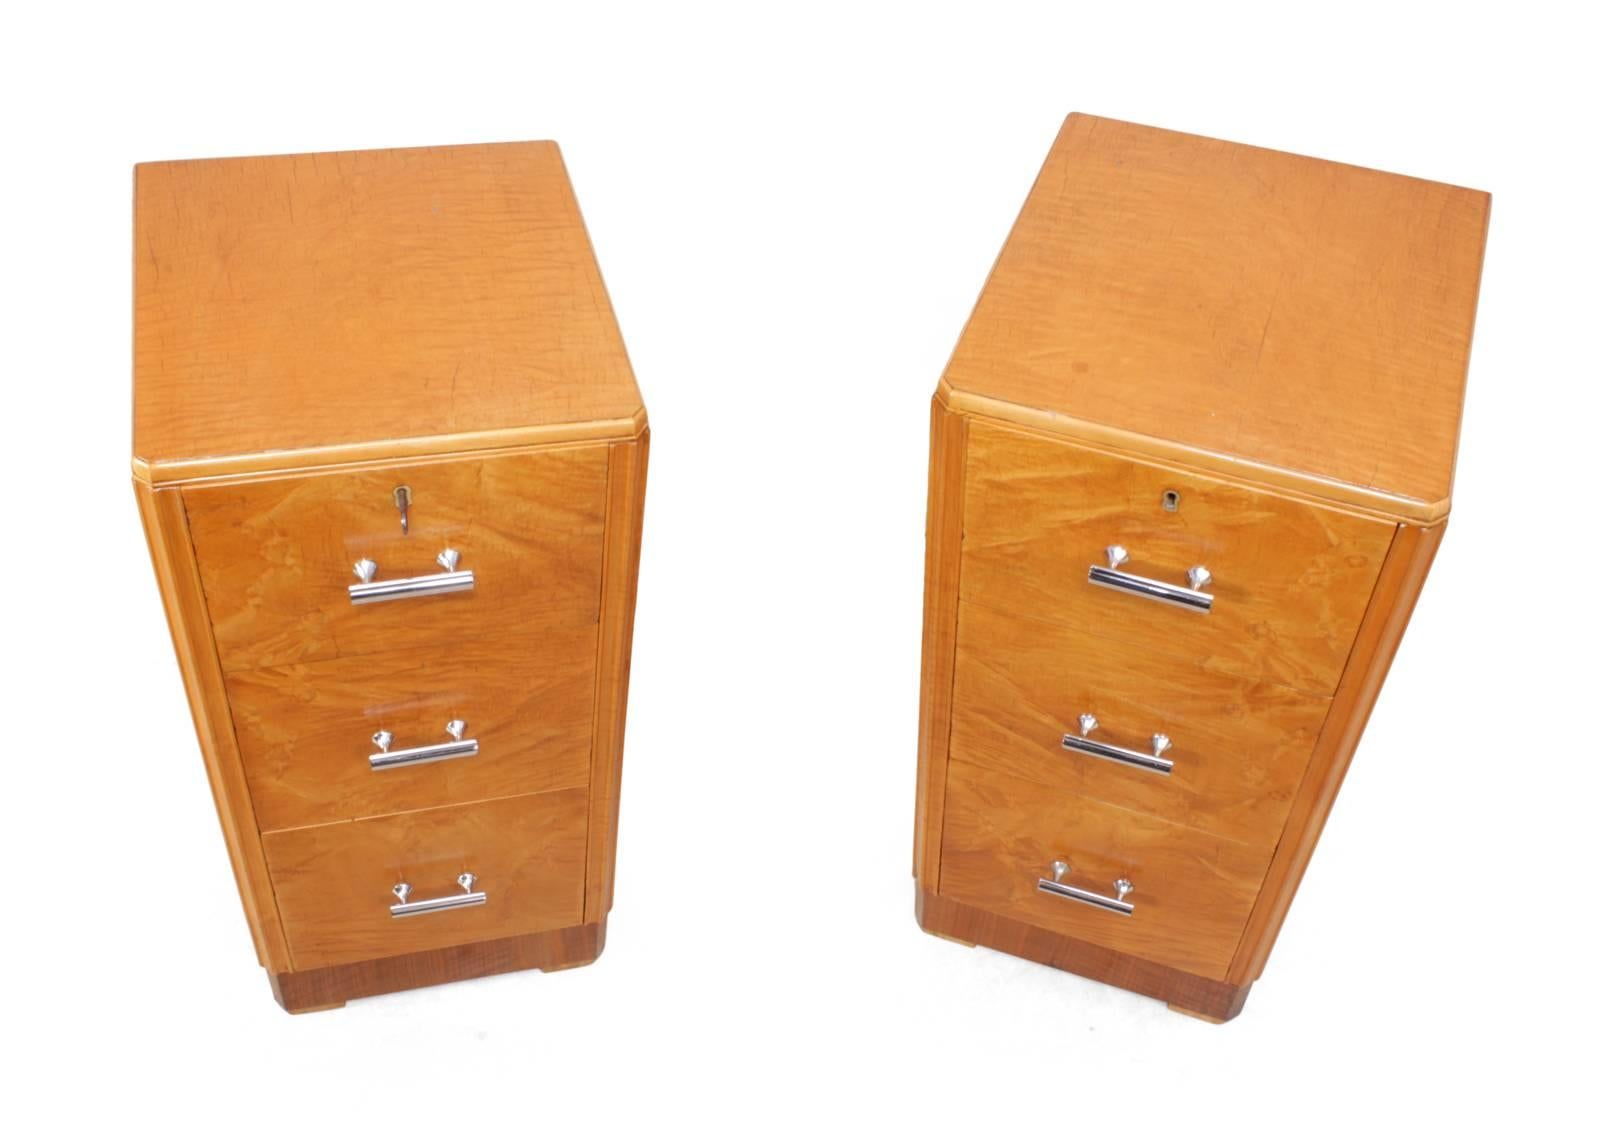 Art Deco bedside chests by Maple & Co.
This pair of 1930s bedside chests produced in England by Maple & Co. London are in very good restored condition, with three graduated drawers in each and chromed handles top drawers are lockable with one key